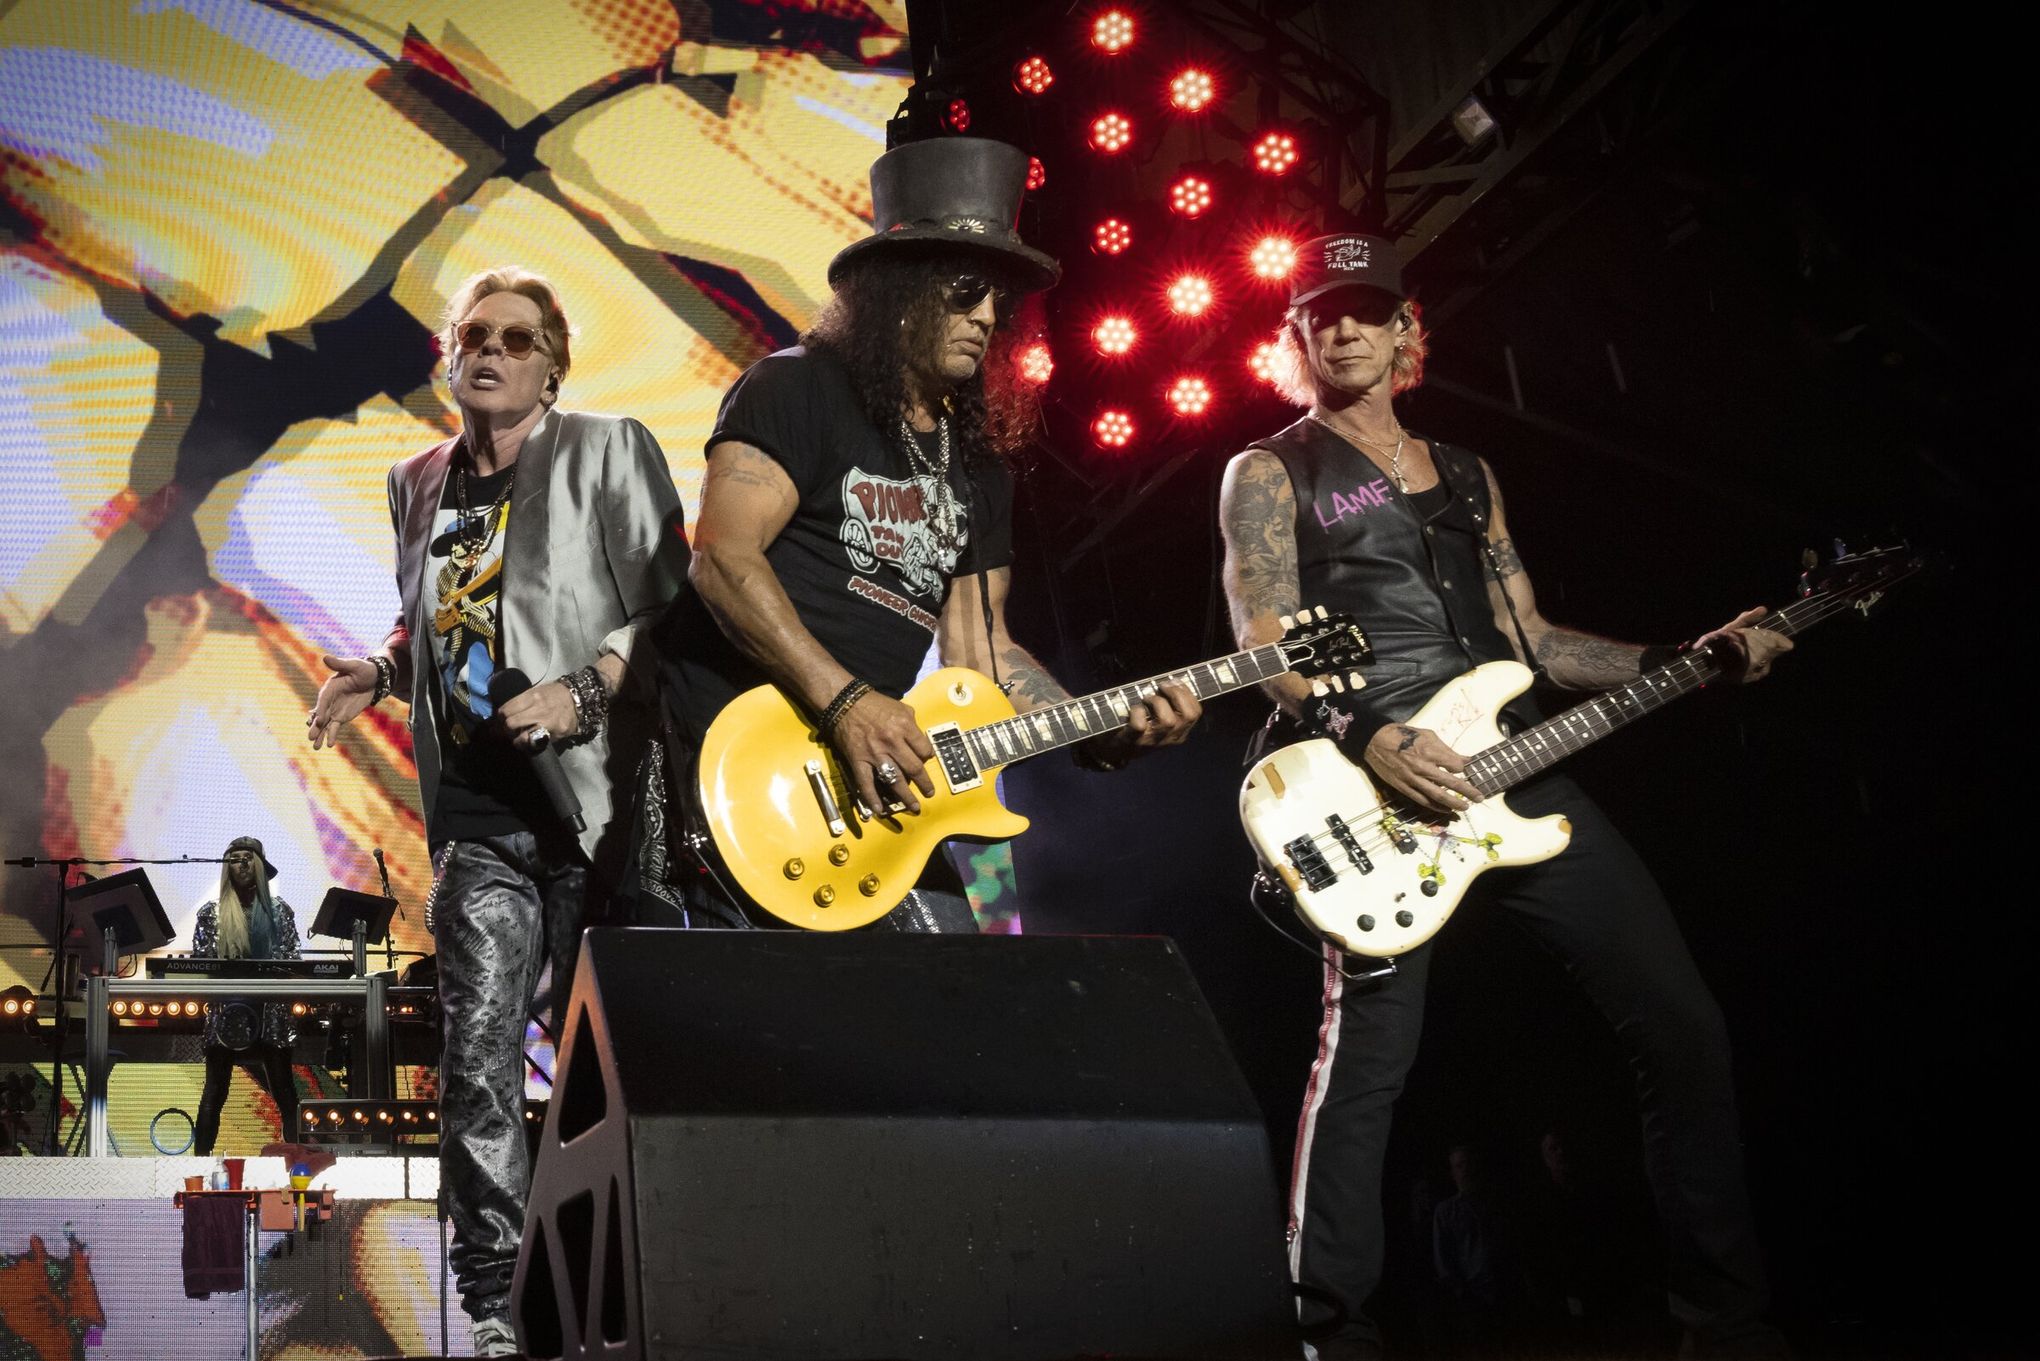 Concert Promoters Share Their Guns N' Roses War Stories